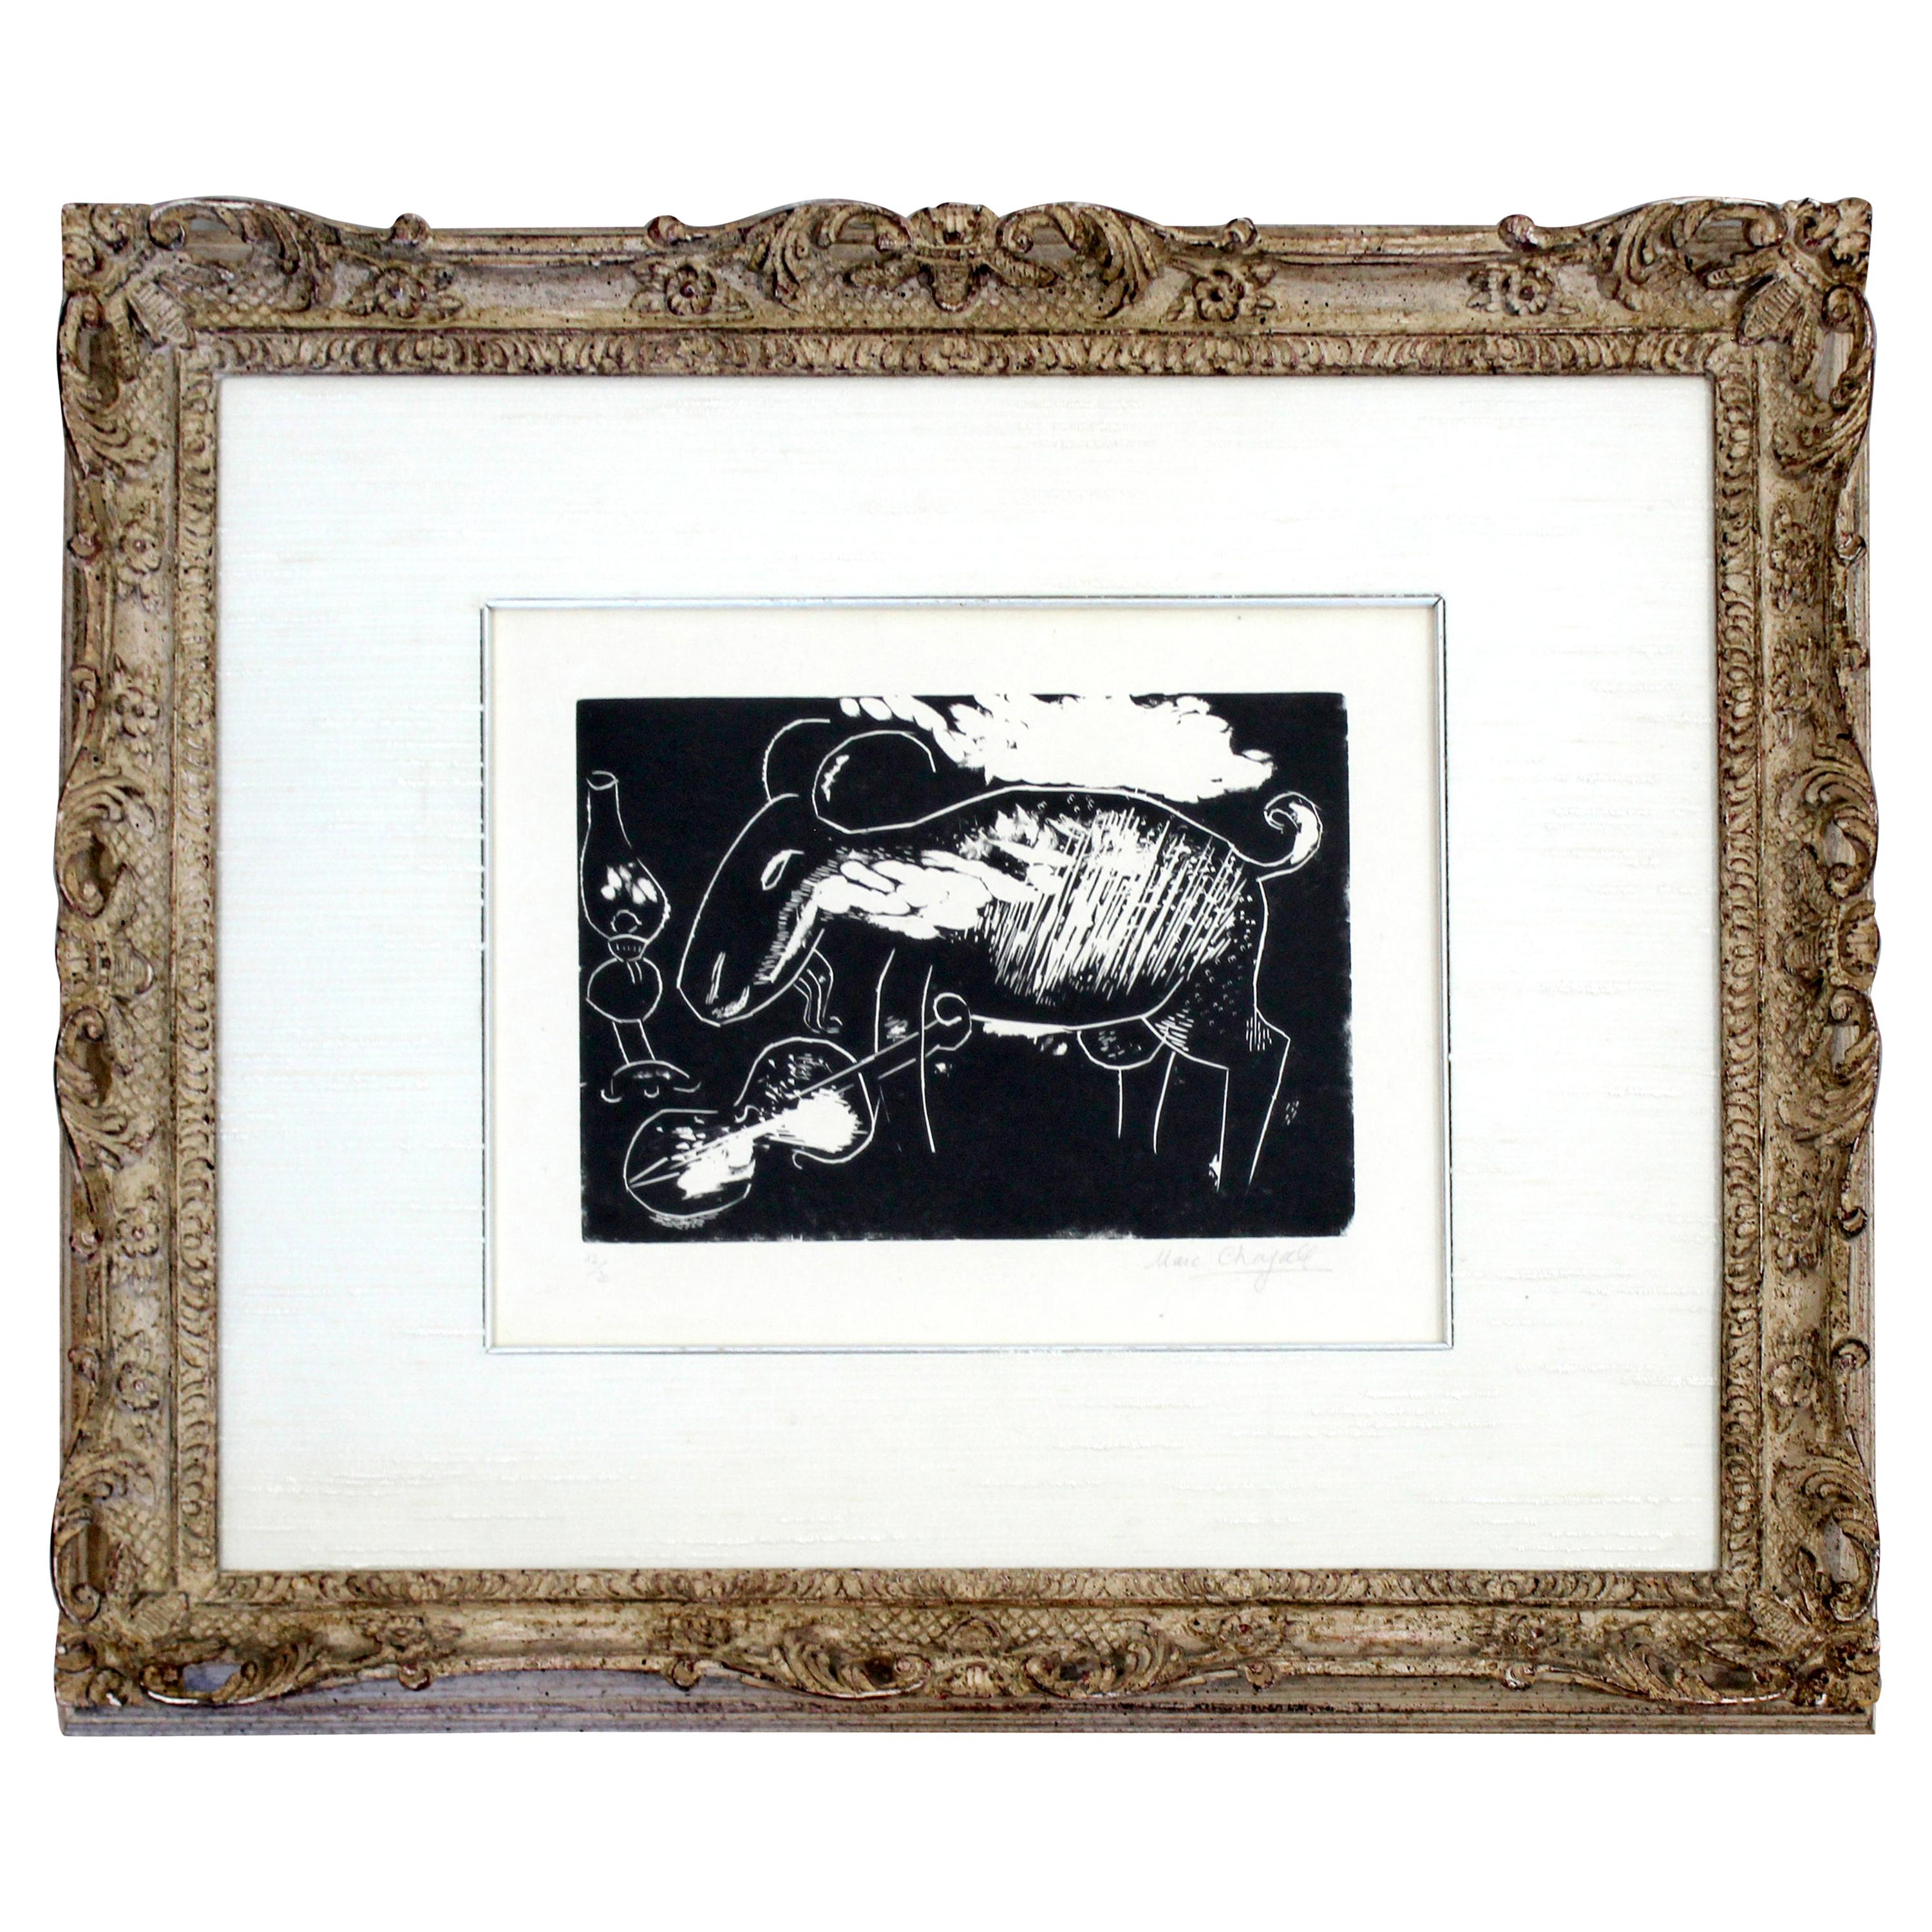 Ziege Mit Geige a Framed Woodcut by Marc Chagall Signed and Numbered 12/20 For Sale